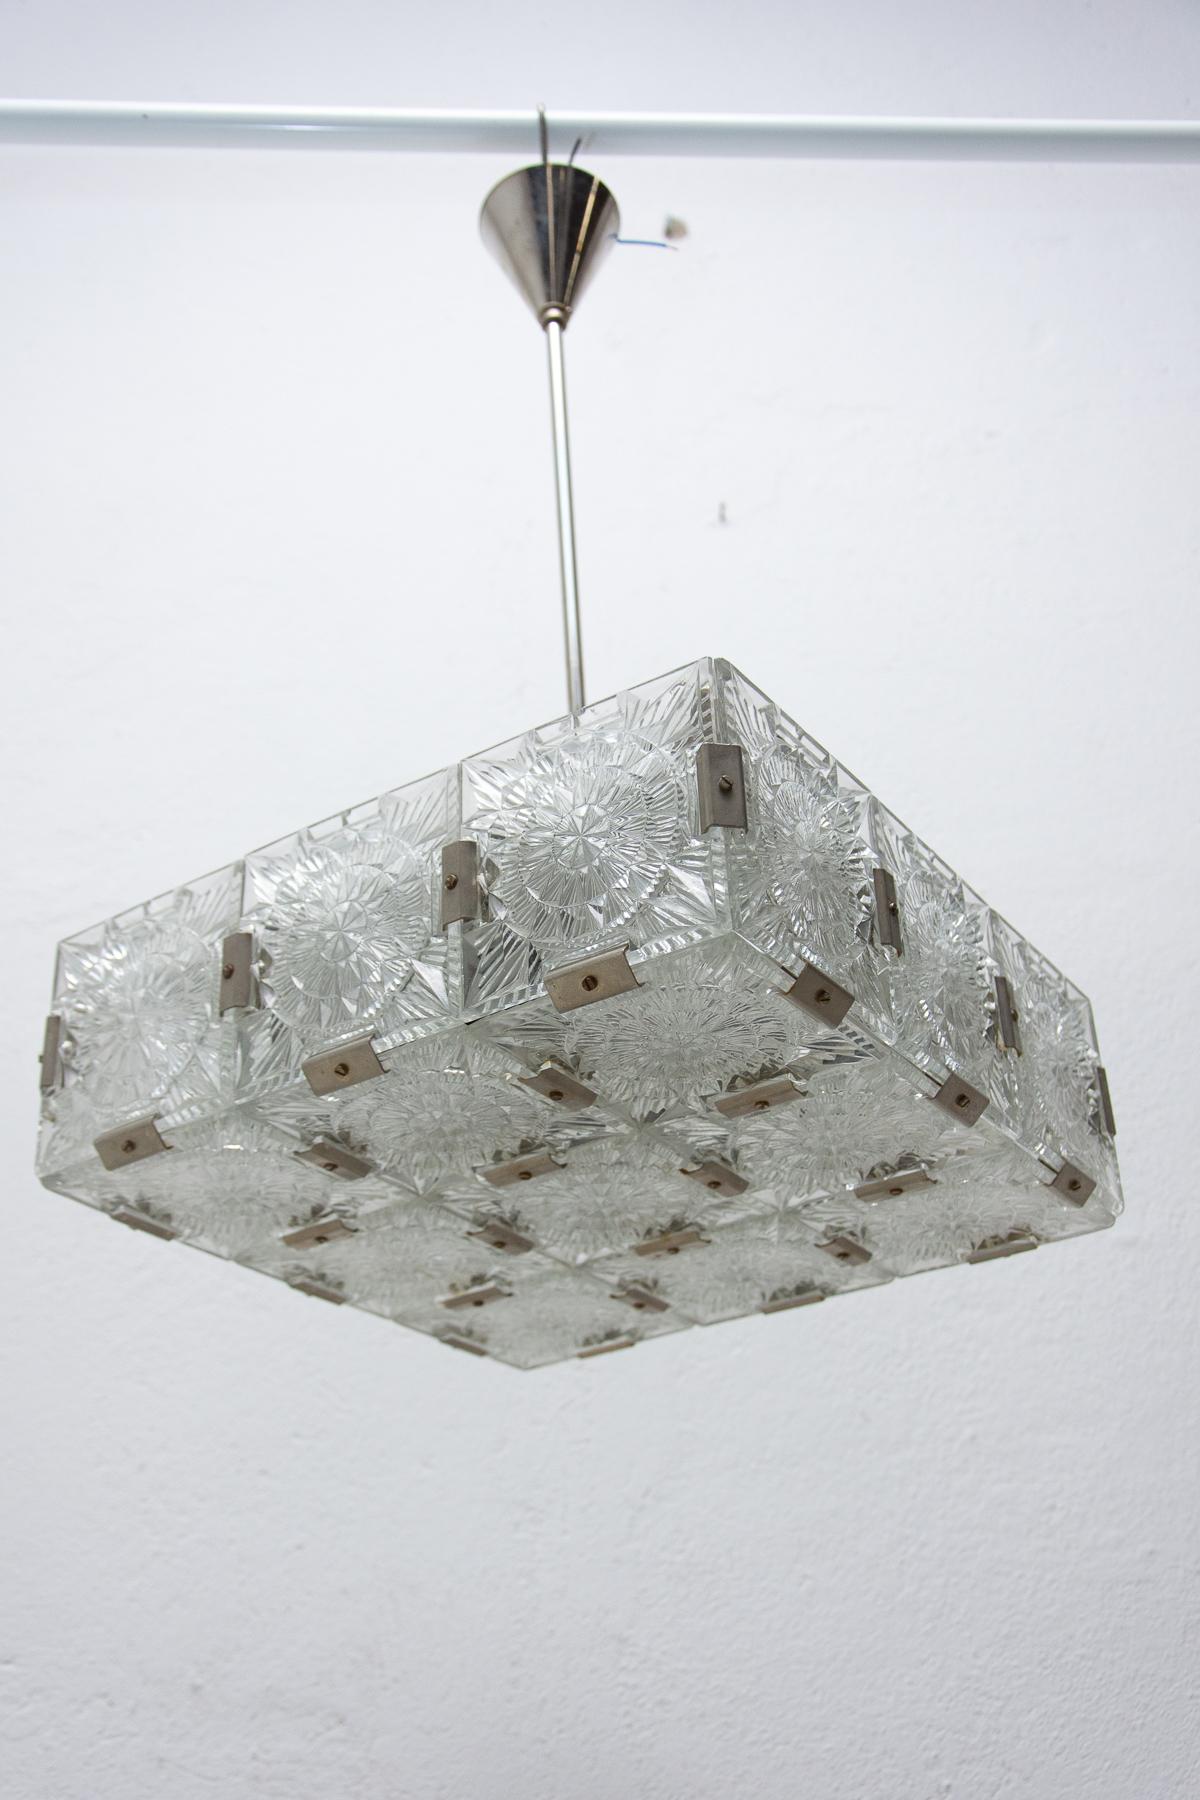 Glass and chromed steel pendant lamp, circa 1970, Czechoslovakia. It was produced by Kamenický Šenov. It is made of a combination of glass and metal. It was cleaned and rewired. E27 bulb socket. Up to 250 V

Measures: Total height: 65 cm

width: